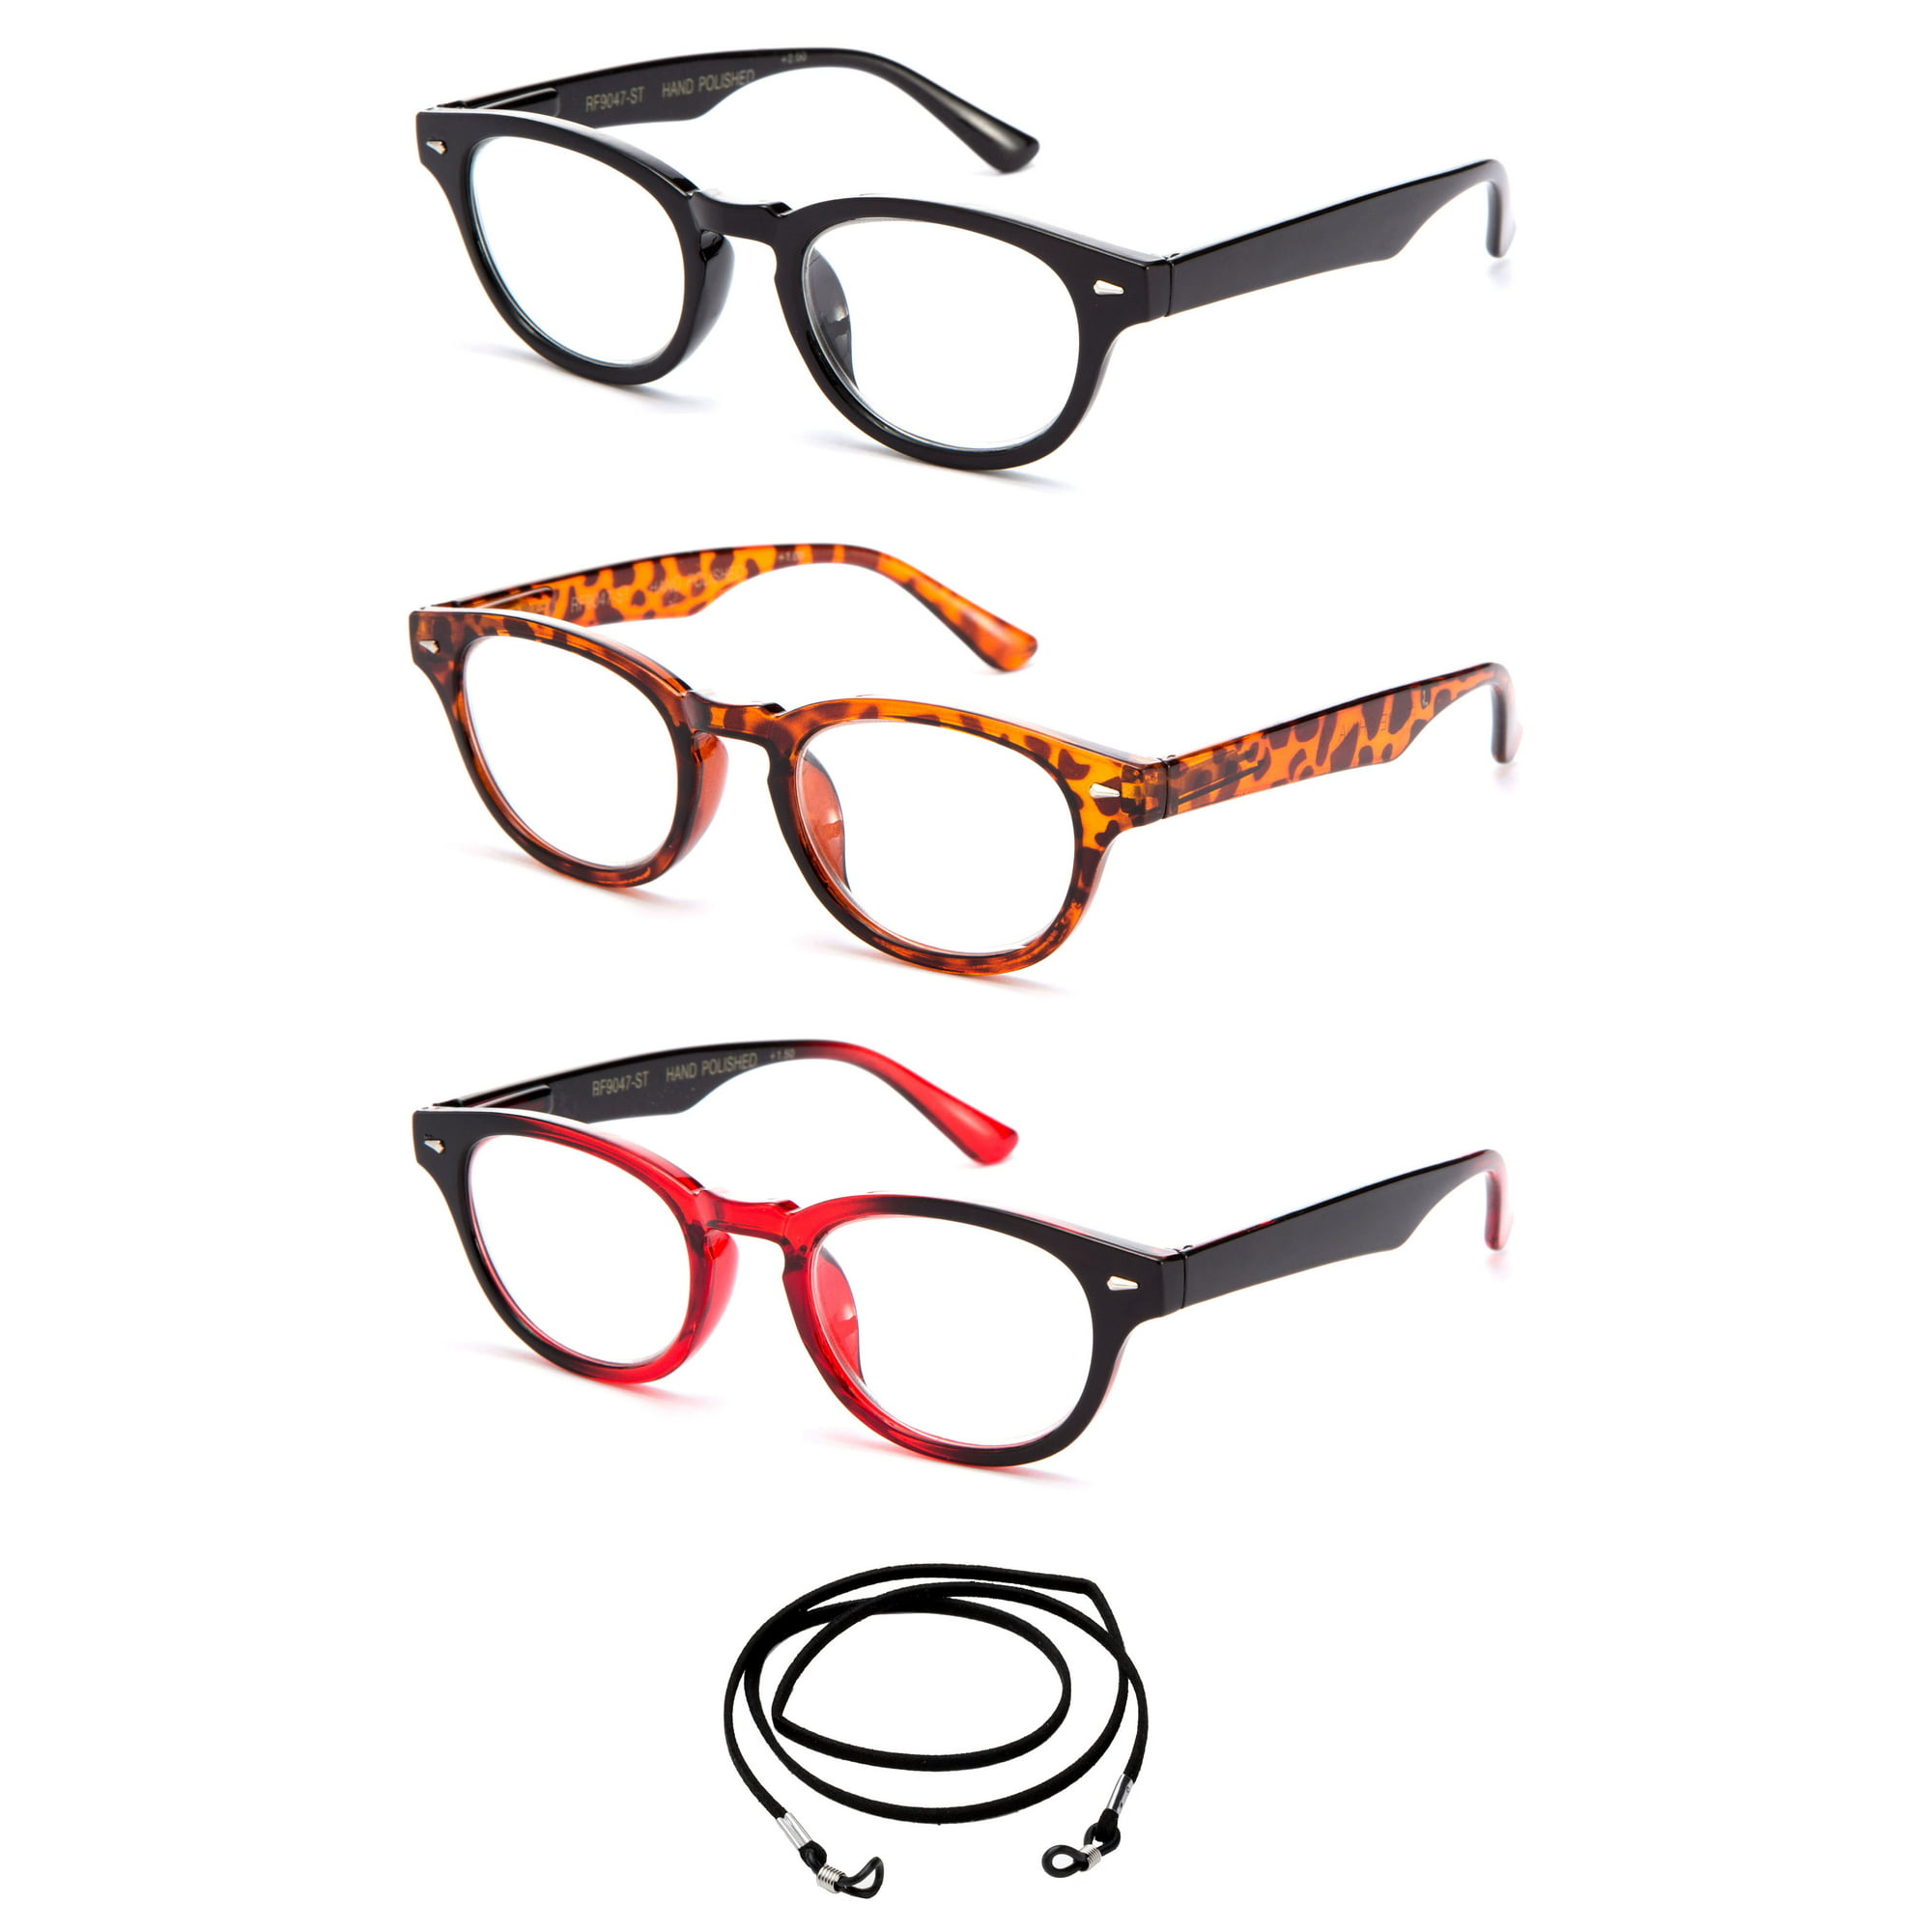 3-Pack Retro Round Reading glasses with Spring Hinges 